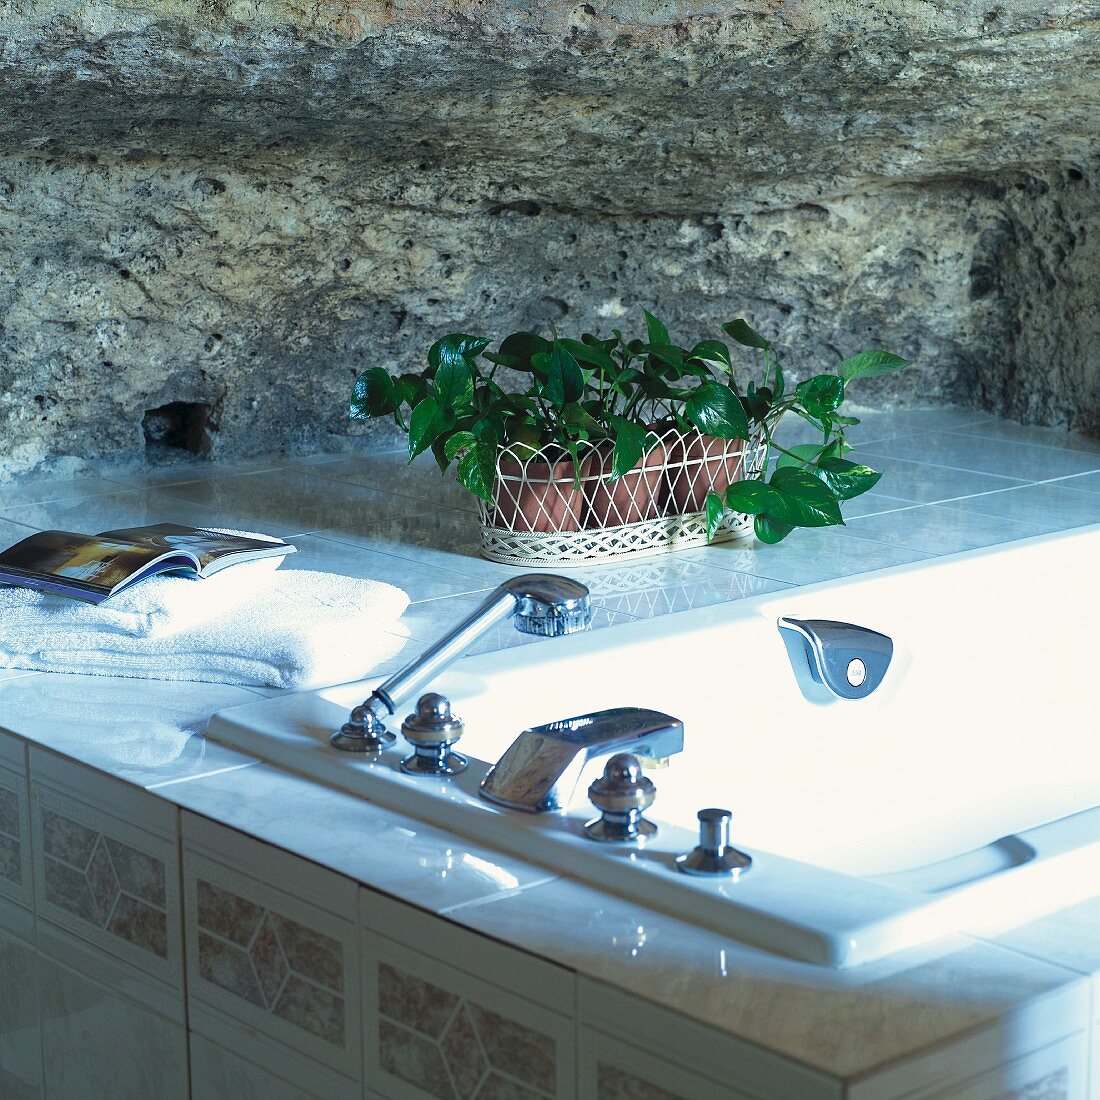 Potted plants on tiled surface next to bathtub in front of rock wall